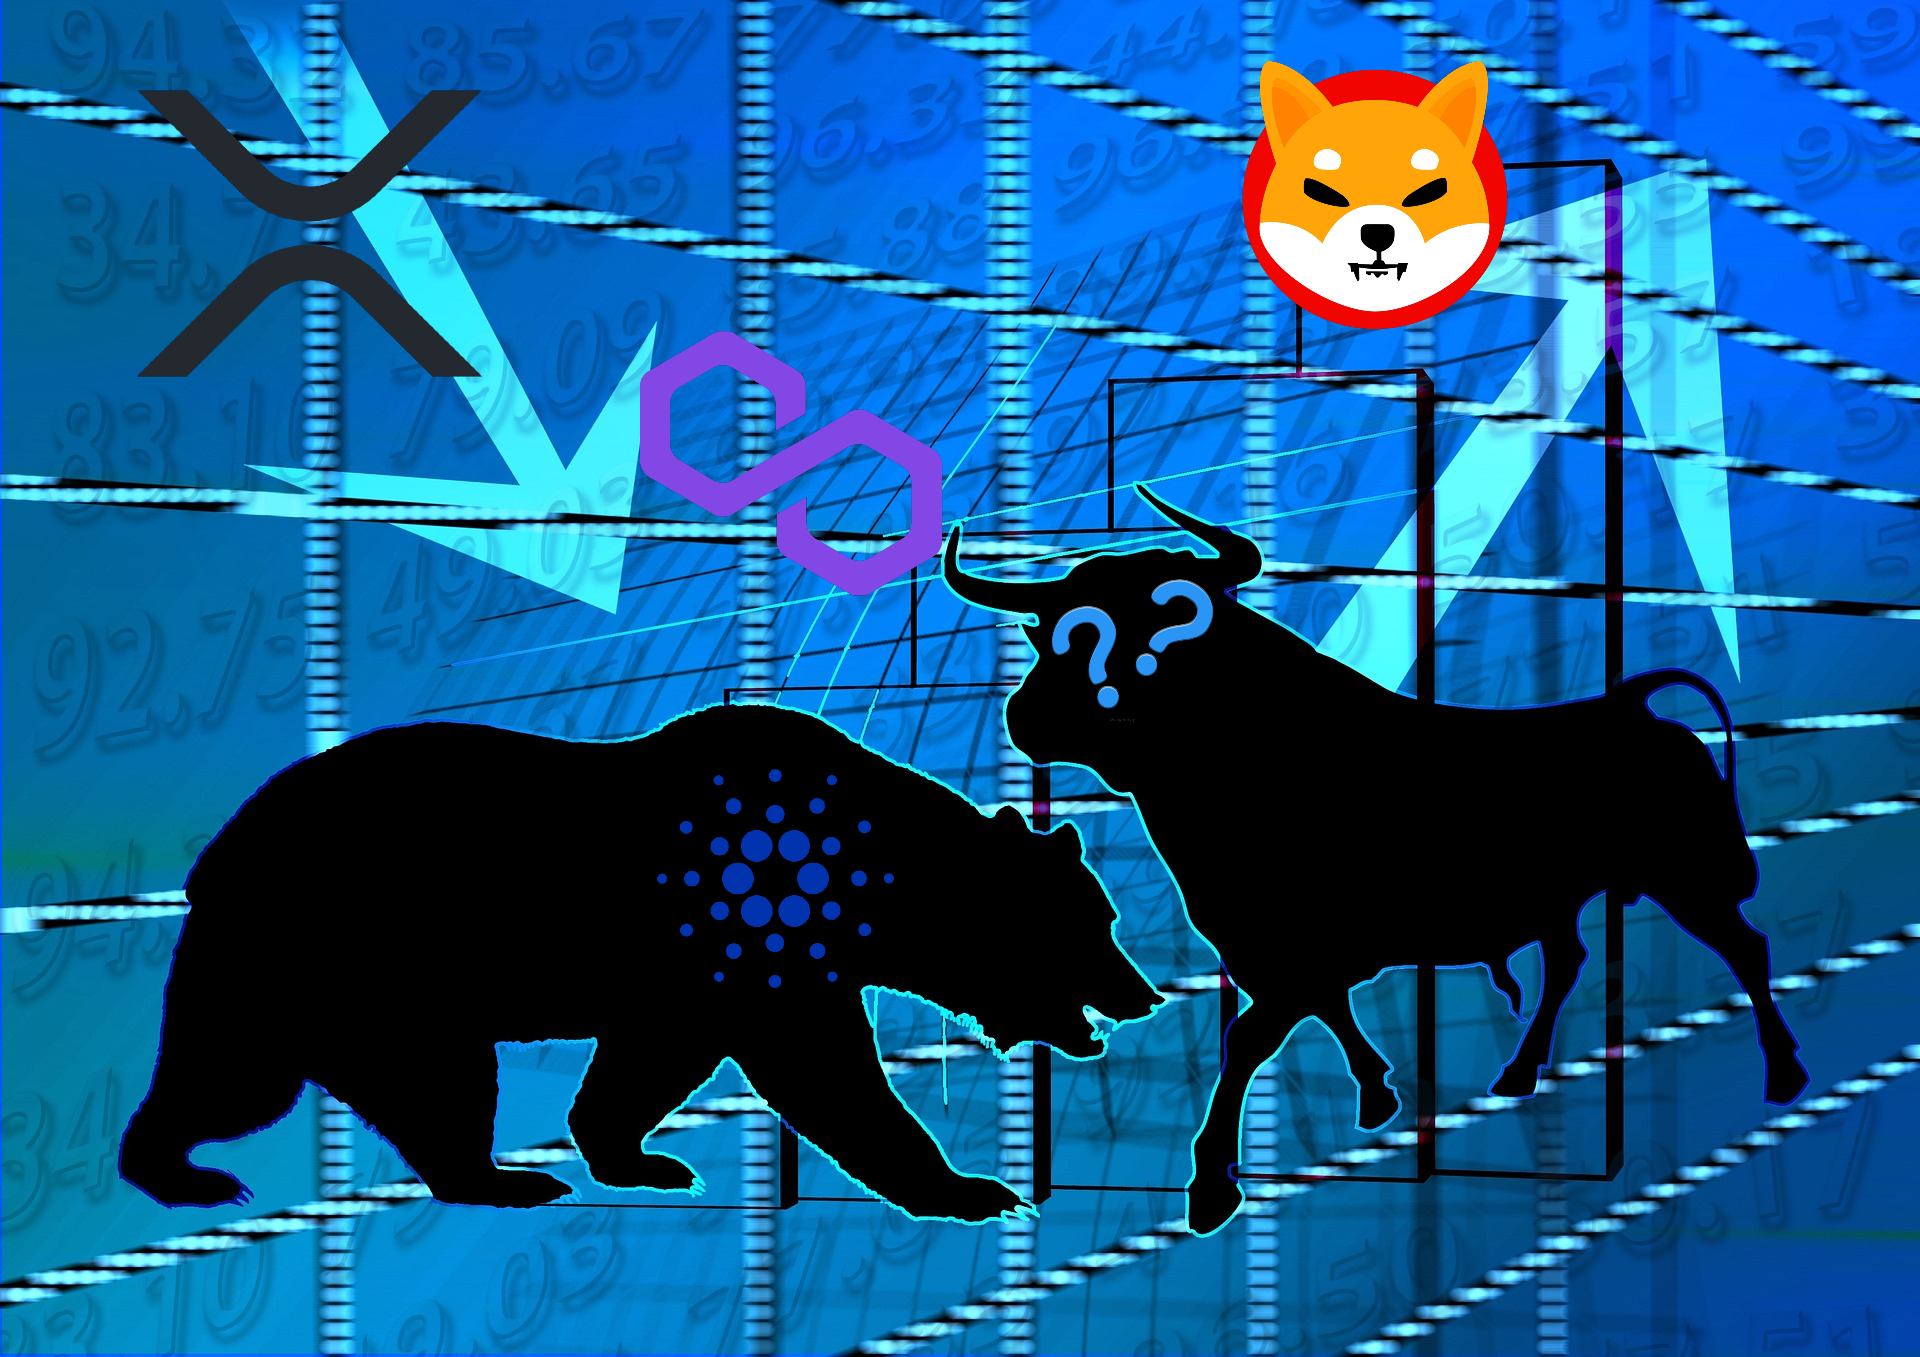 Cryptocurrency markets recovered slightly on Nov 24, but bearish pressure remains